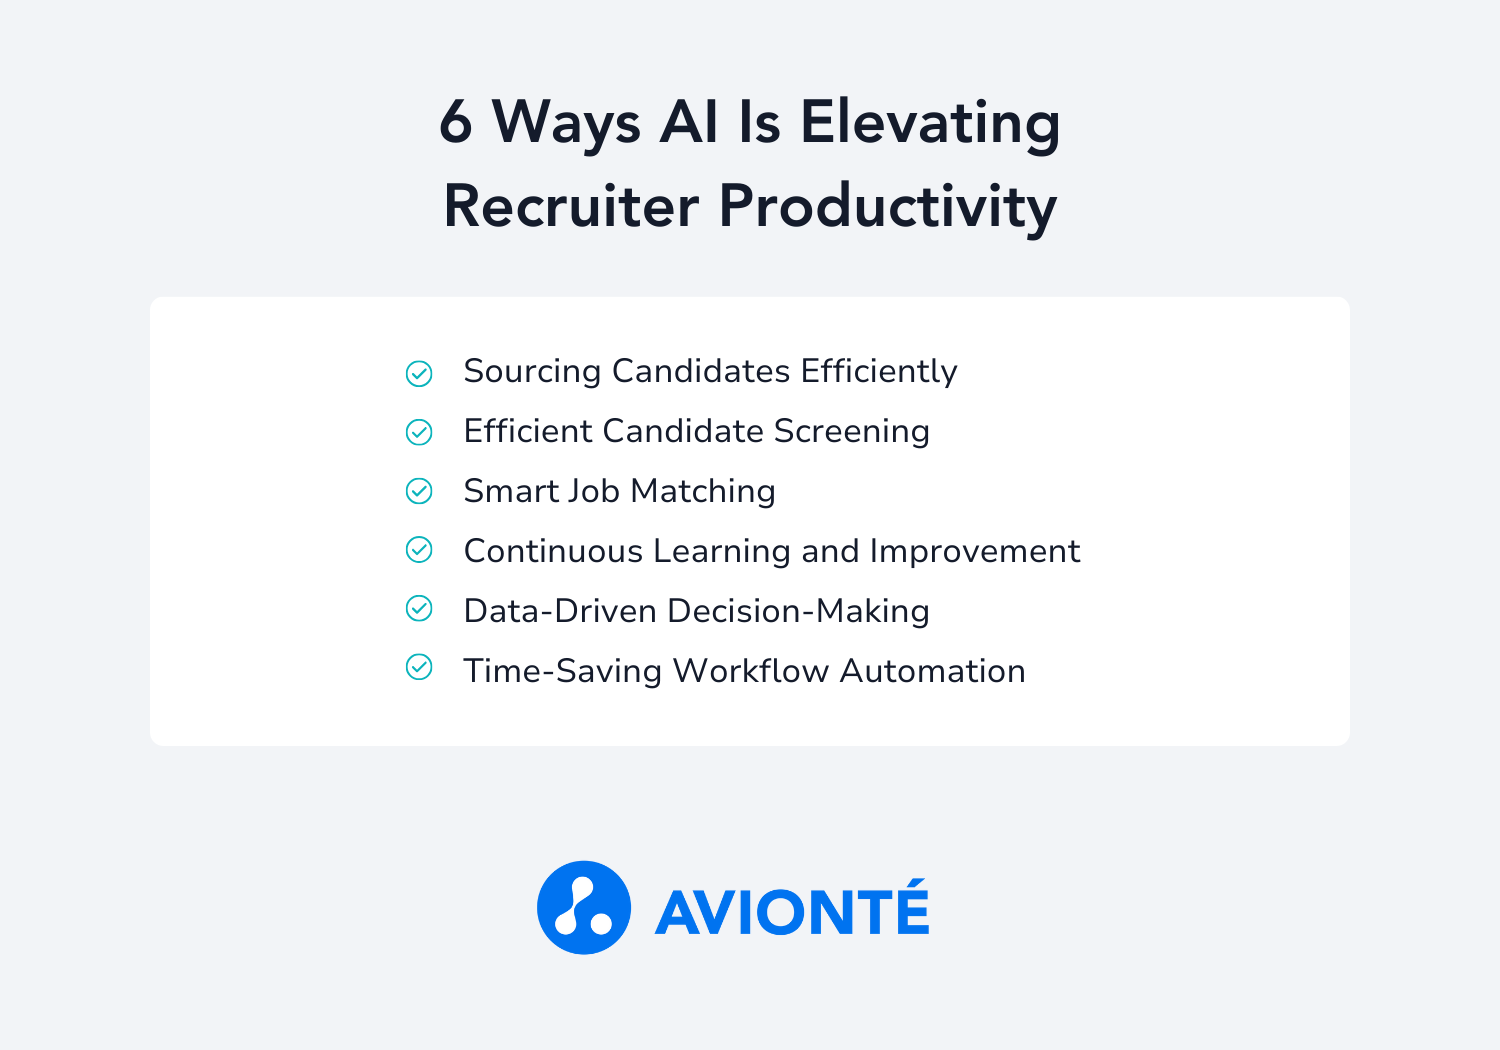 6 Ways AI Is Elevating Recruiter Productivity